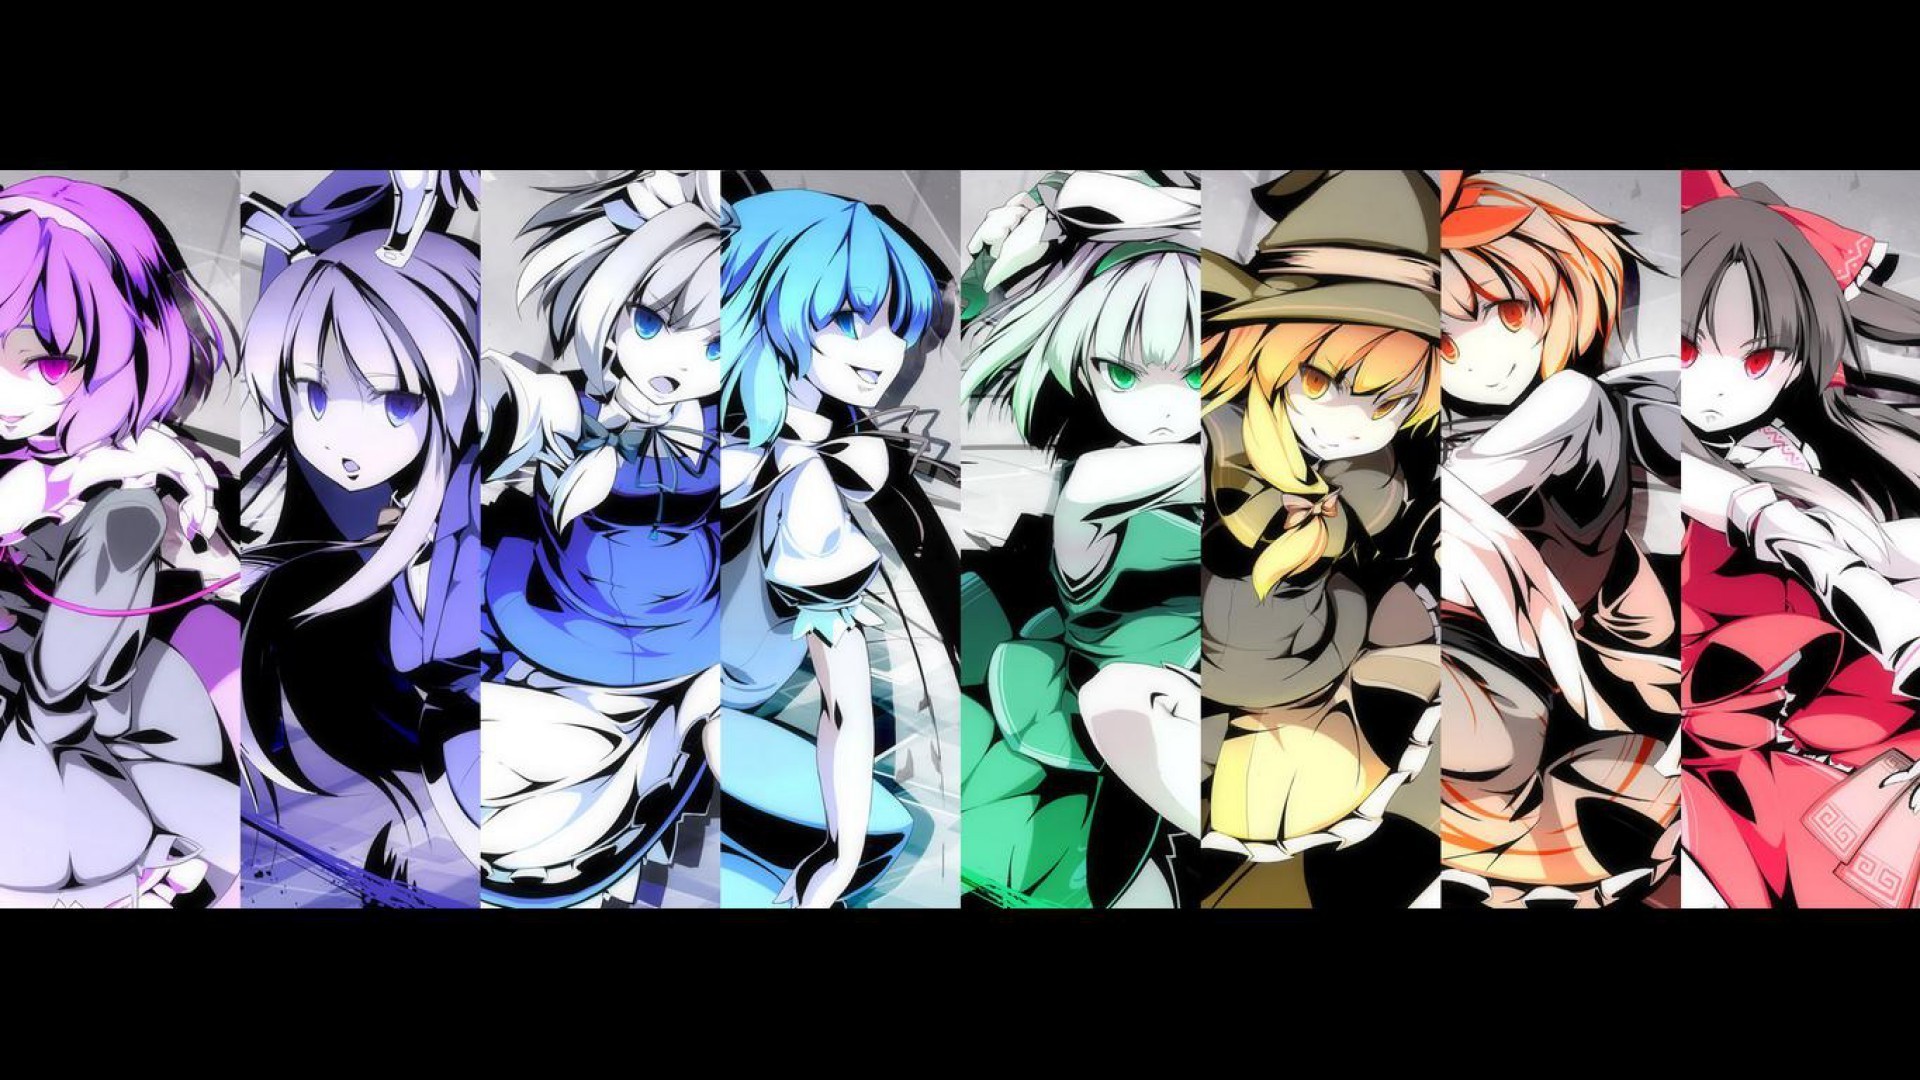 Renmei Touhou Anime Girls Tube Smartphone Wallpaper Hq Background